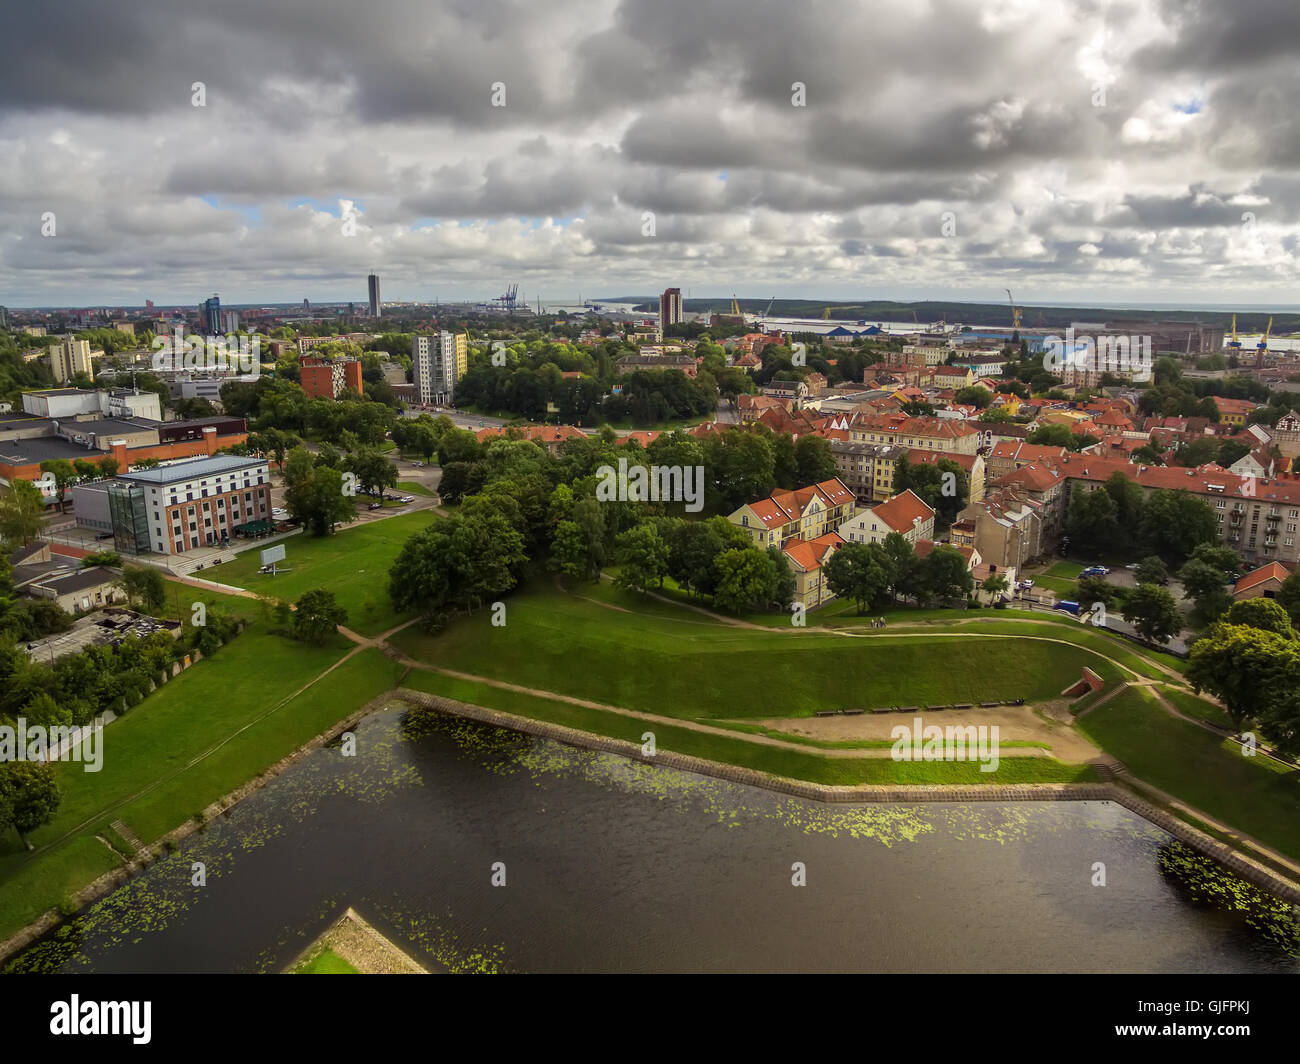 Klaipeda, Lithuania: representative aerial view of Old Town Stock Photo